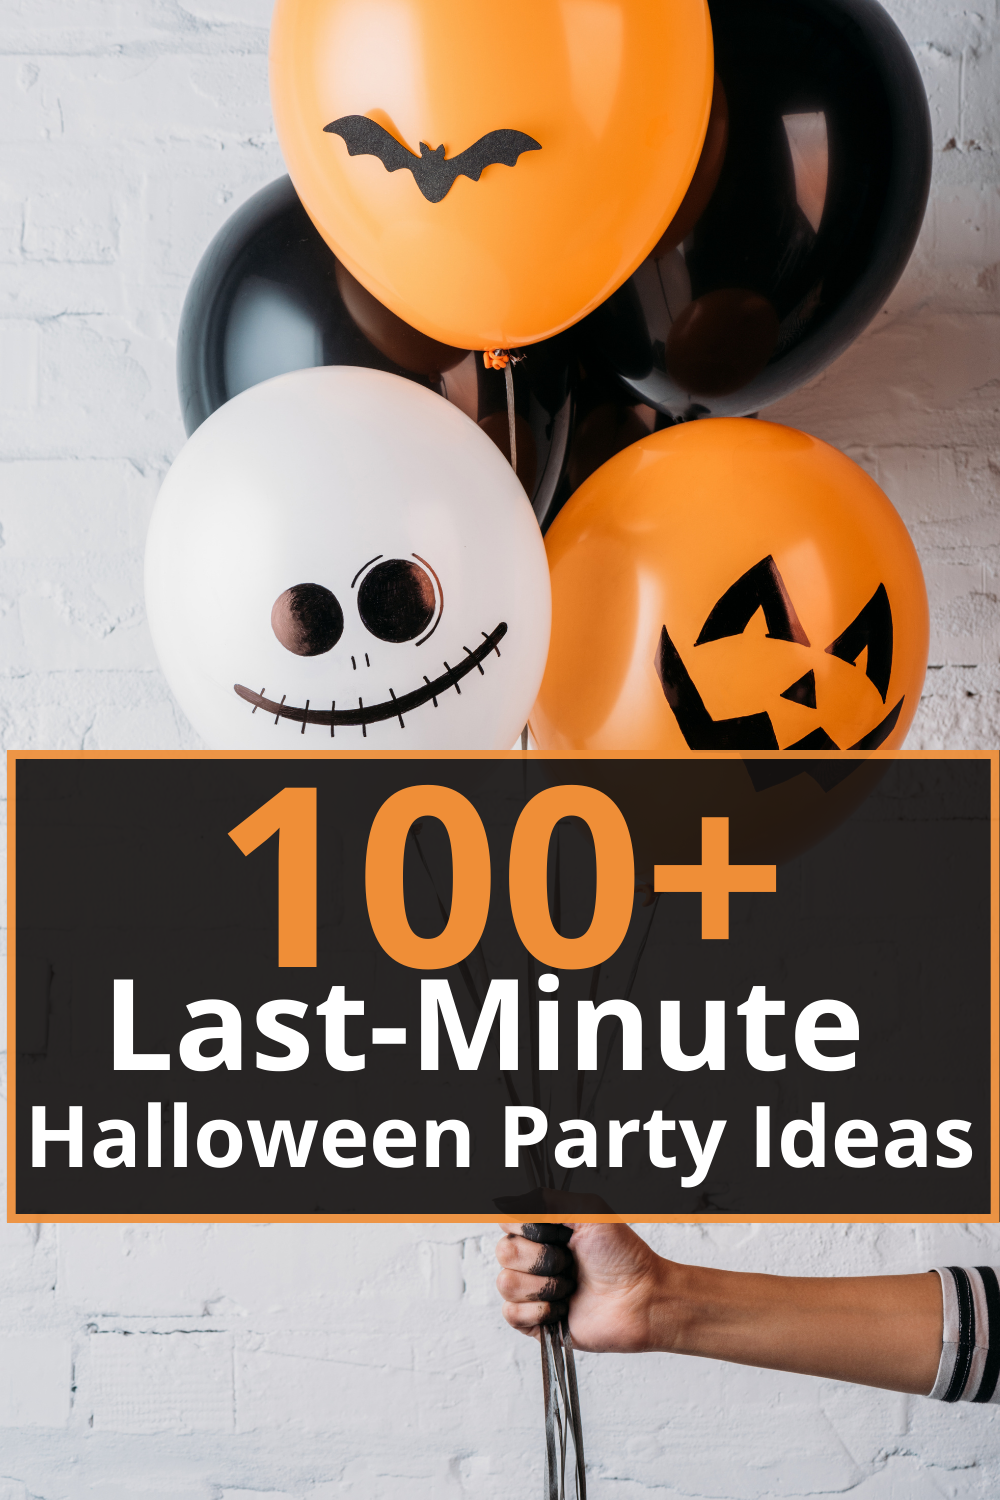 Looking for last-minute Halloween party ideas? Check out our blog post featuring 100 creative and fun ideas to help you host a spooktacular gathering in no time. From games and decorations to treats and activities, we've got you covered for a memorable Halloween party!